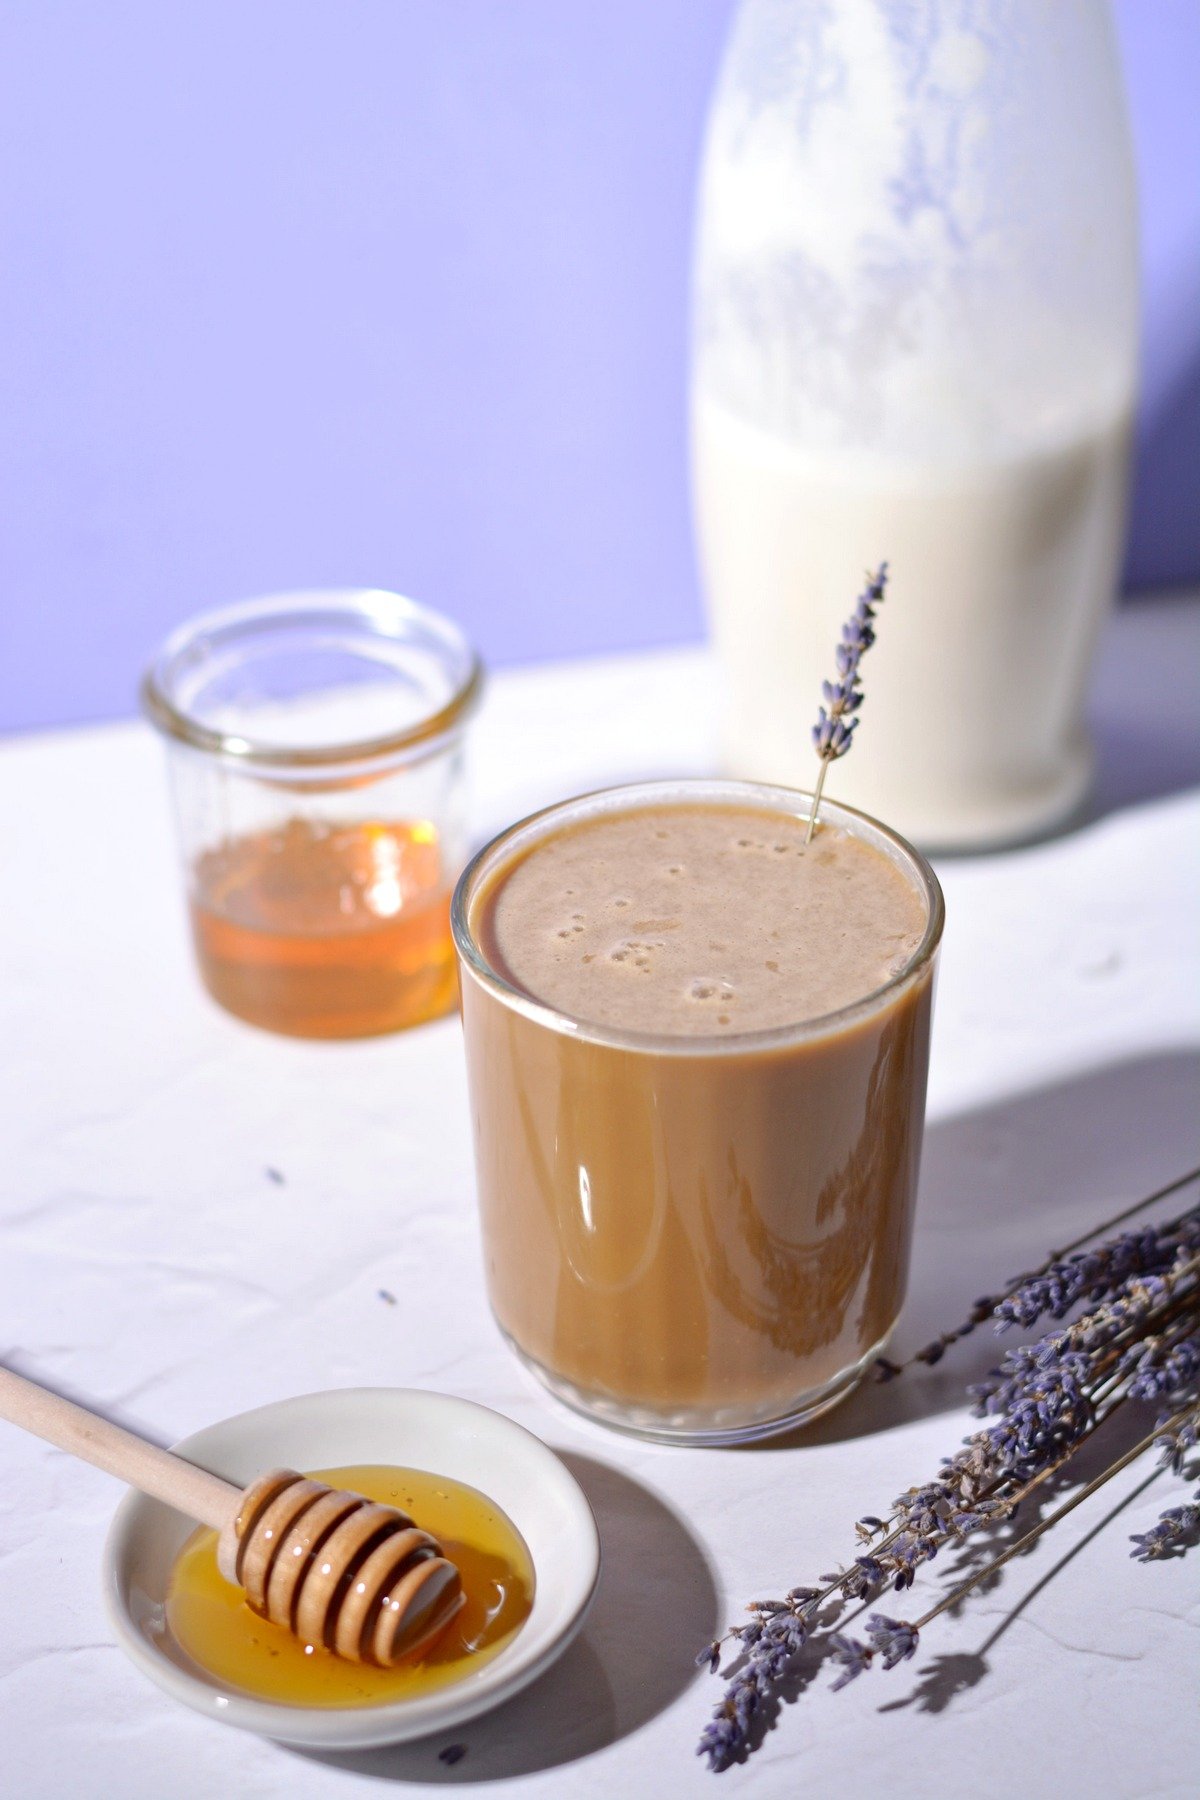 A honeybee latte in a glass with a sprig of lavender surrounded by honey.